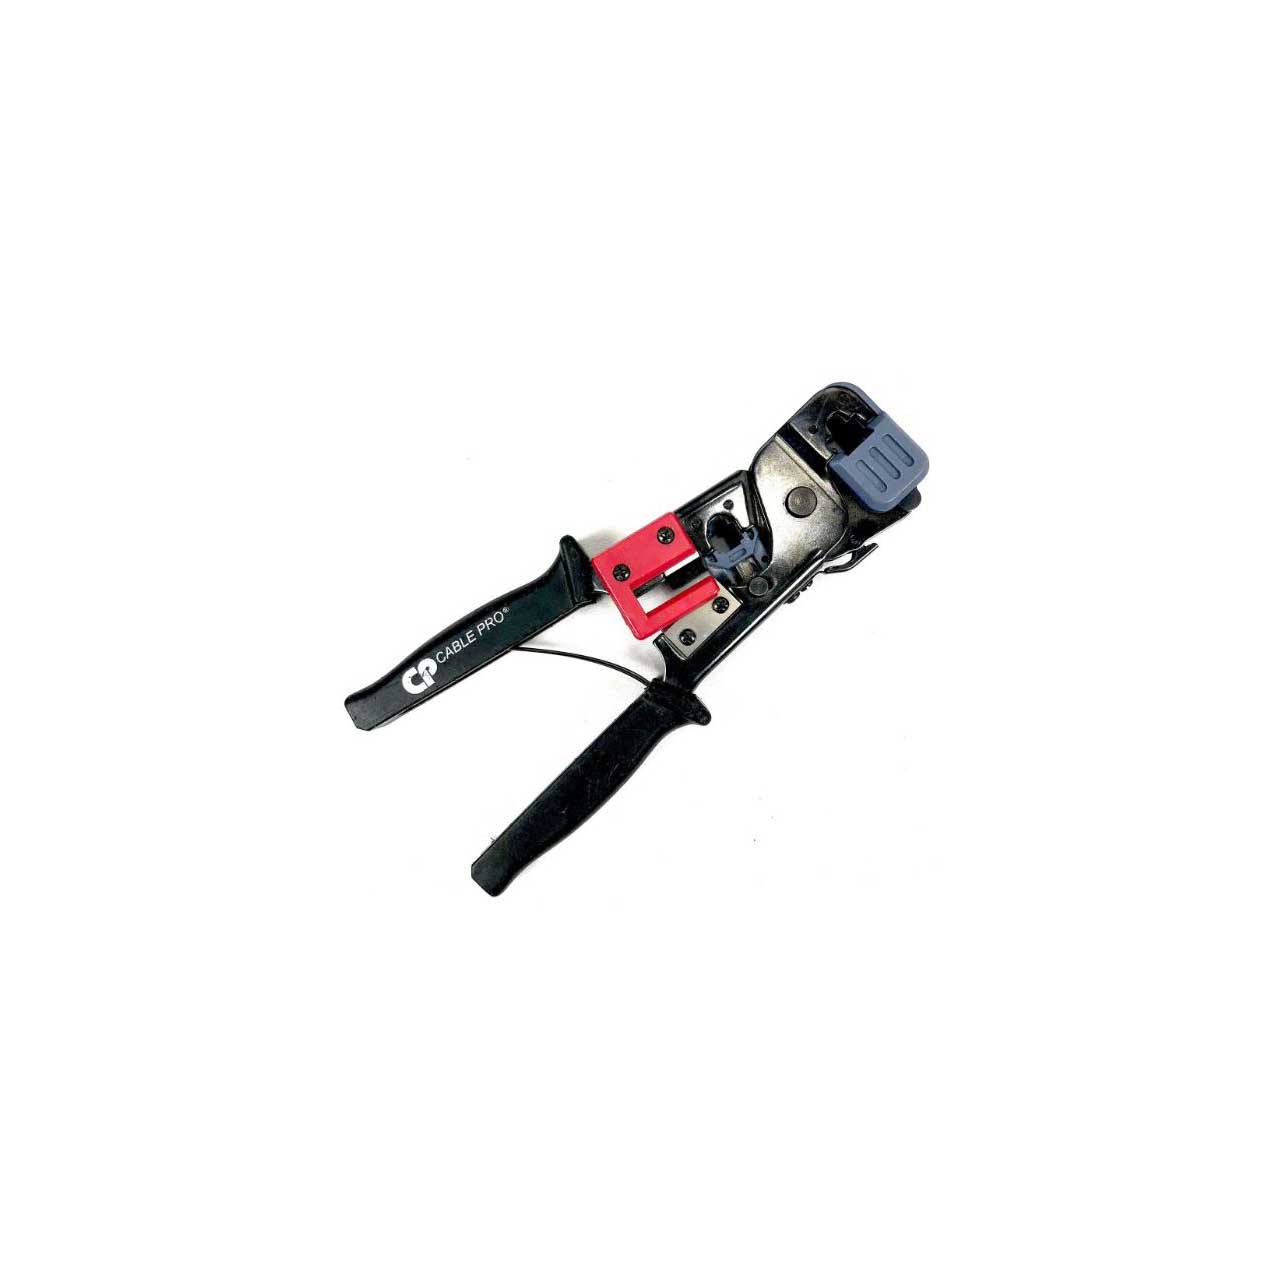 Belden CPRJ11-45 Crimp and Strip Tool for RJ11/6 Position and RJ45/8 Position Modular Plugs